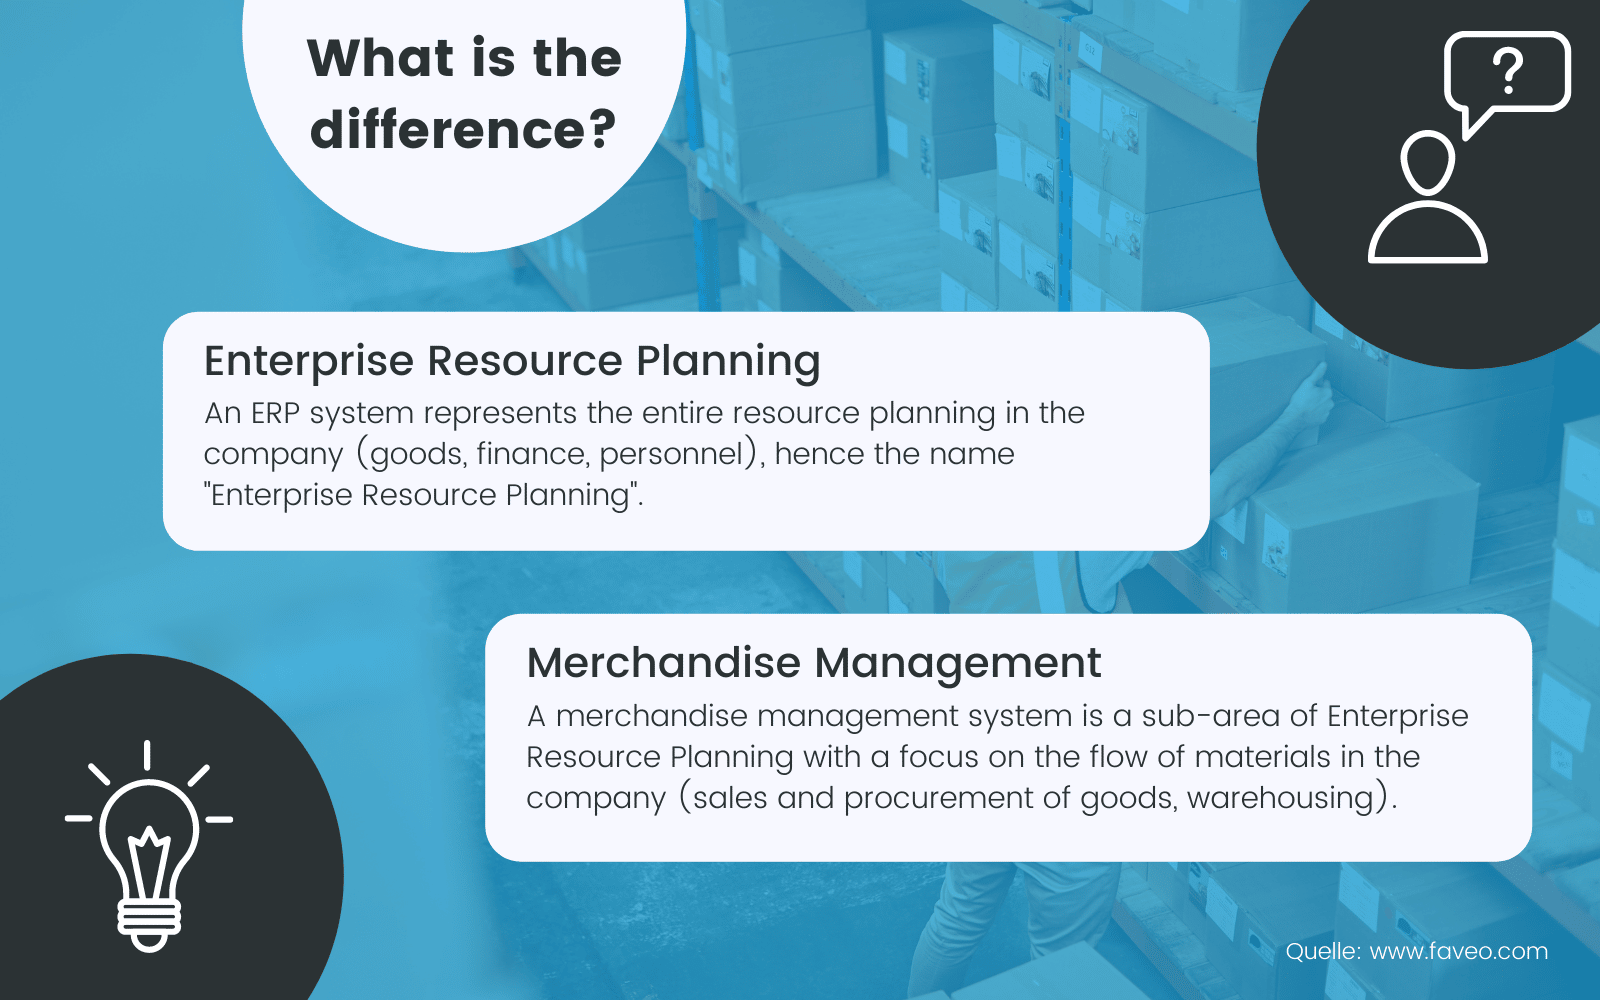 the difference between ERP and merchandise management